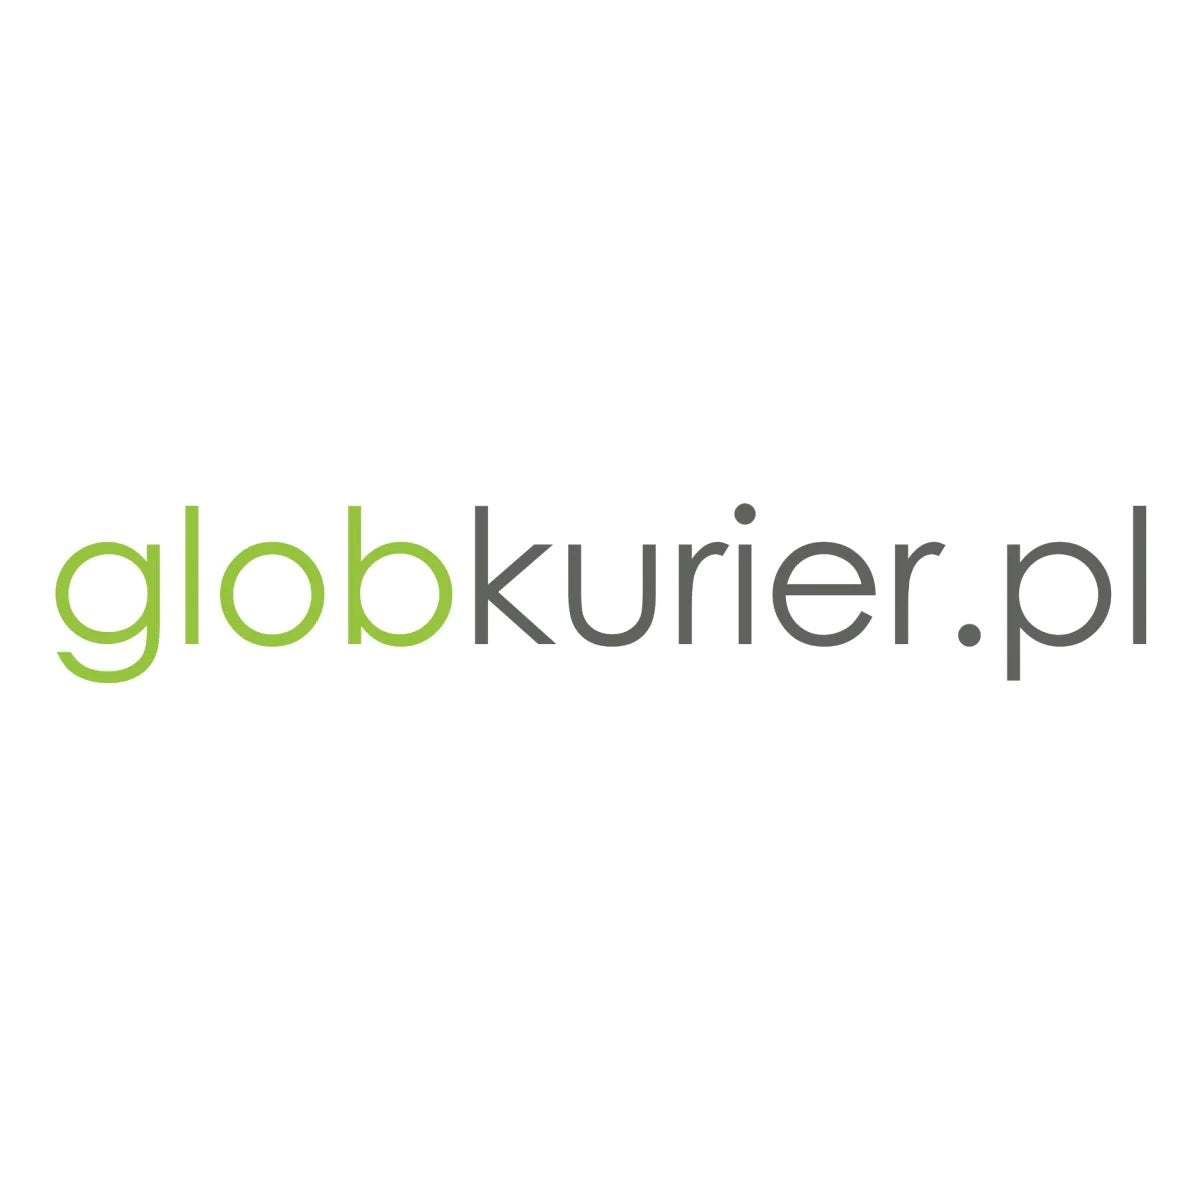 Hire Shopify Experts to integrate GlobKurier app into a Shopify store